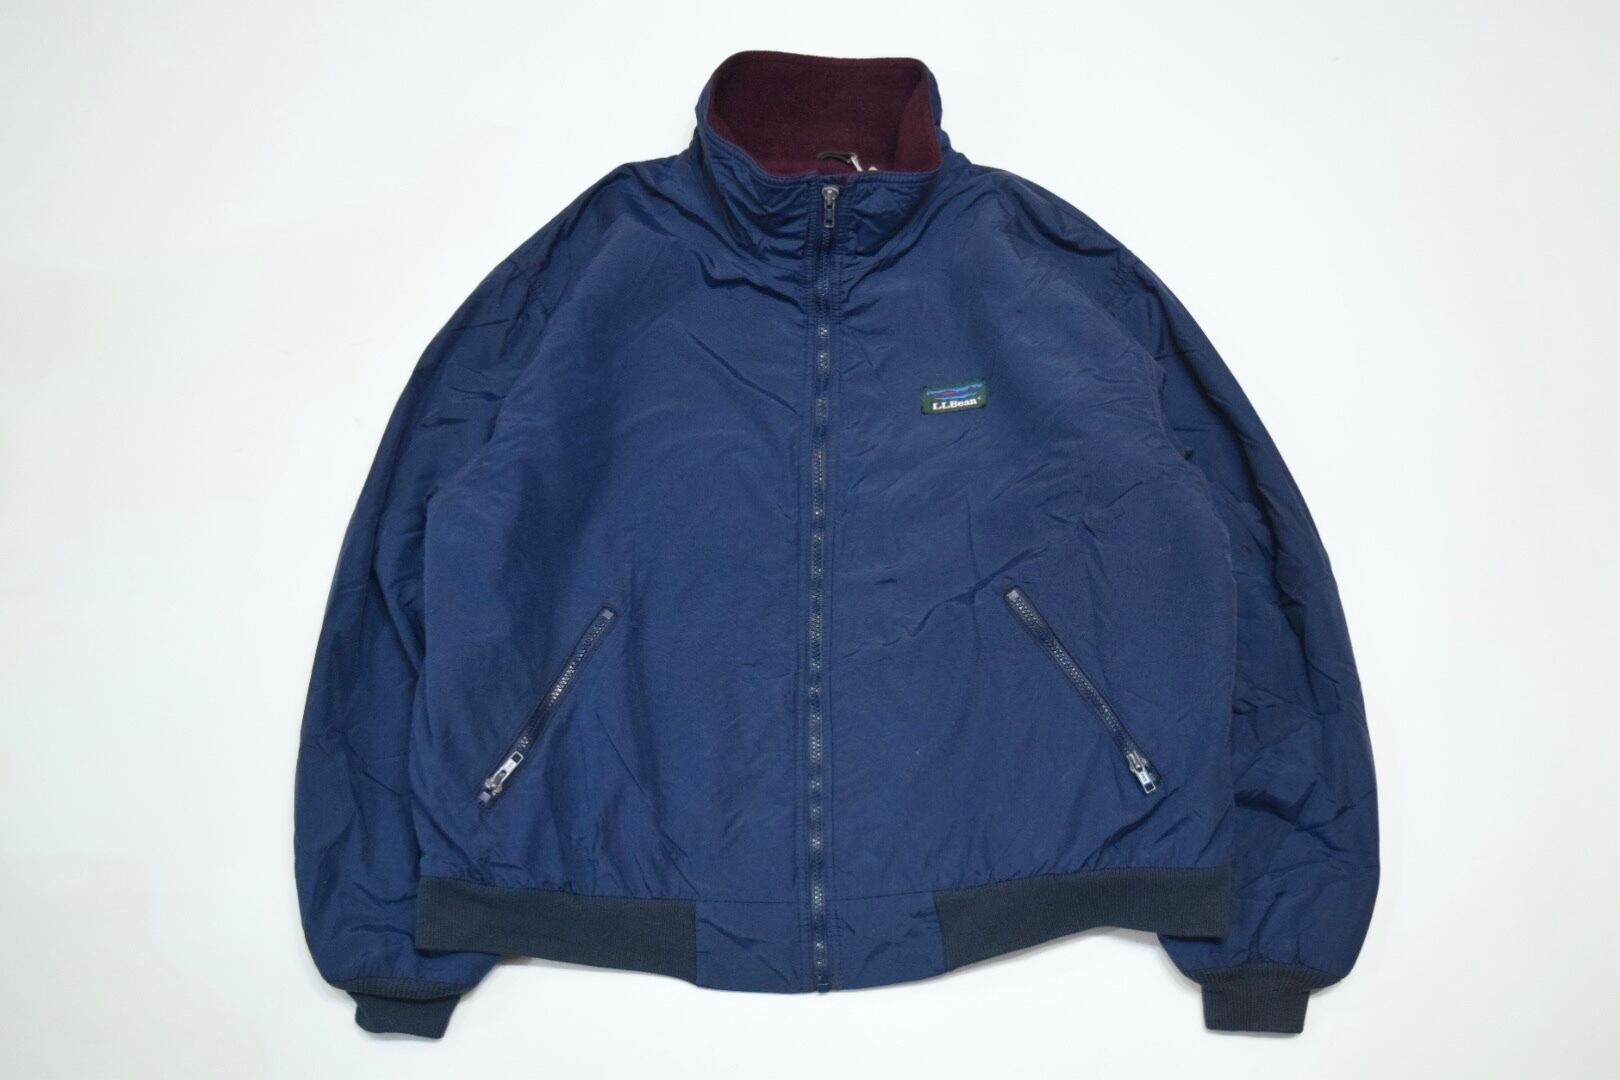 USED 80s L.L.bean Warm-Up Jacket -Large 01378